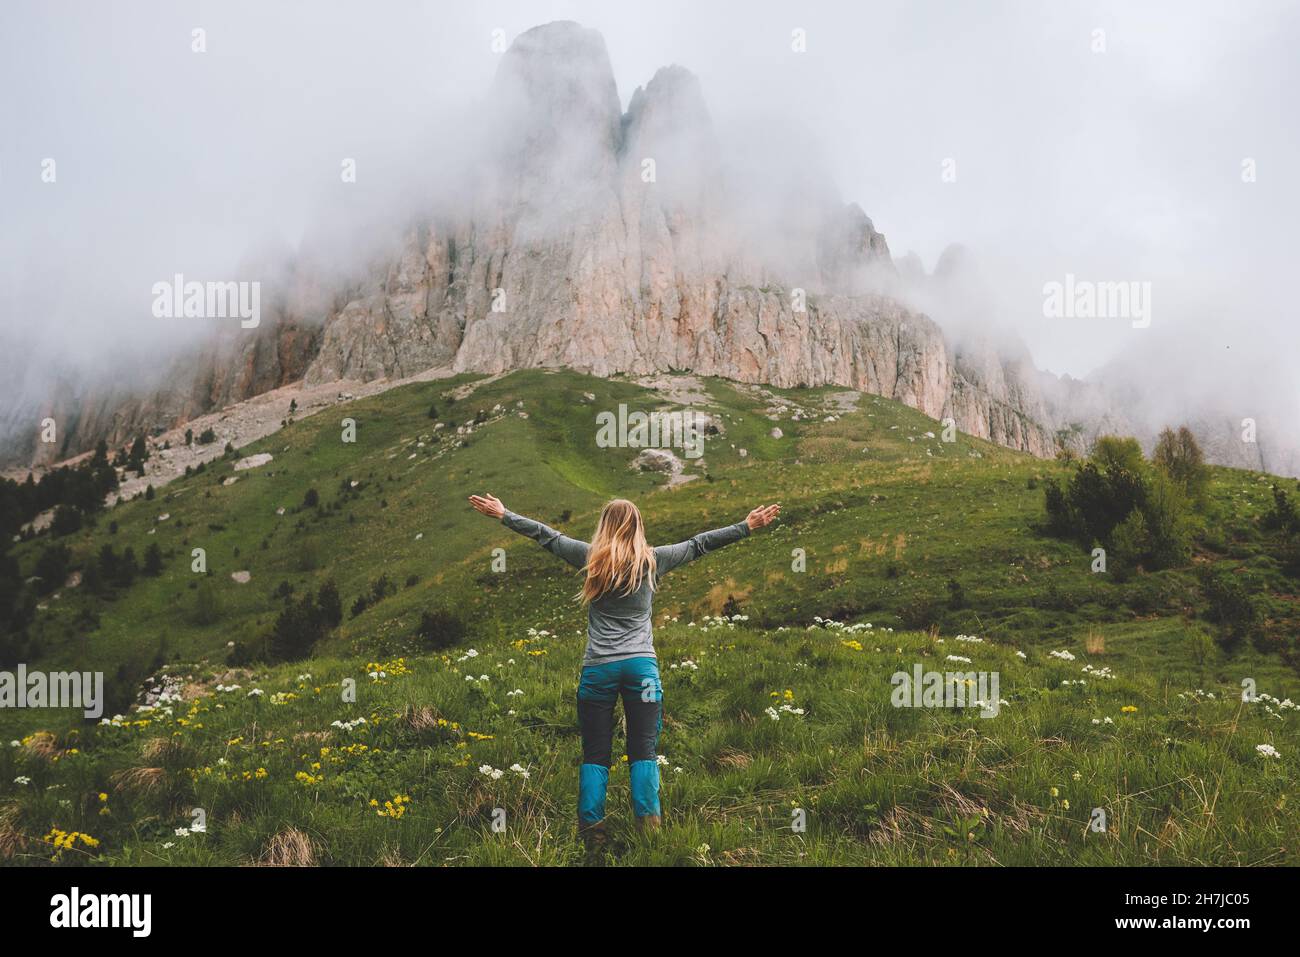 Freedom concept woman hiking in foggy mountains happy raised hands travel vacations outdoor healthy lifestyle activity eco tourism Stock Photo